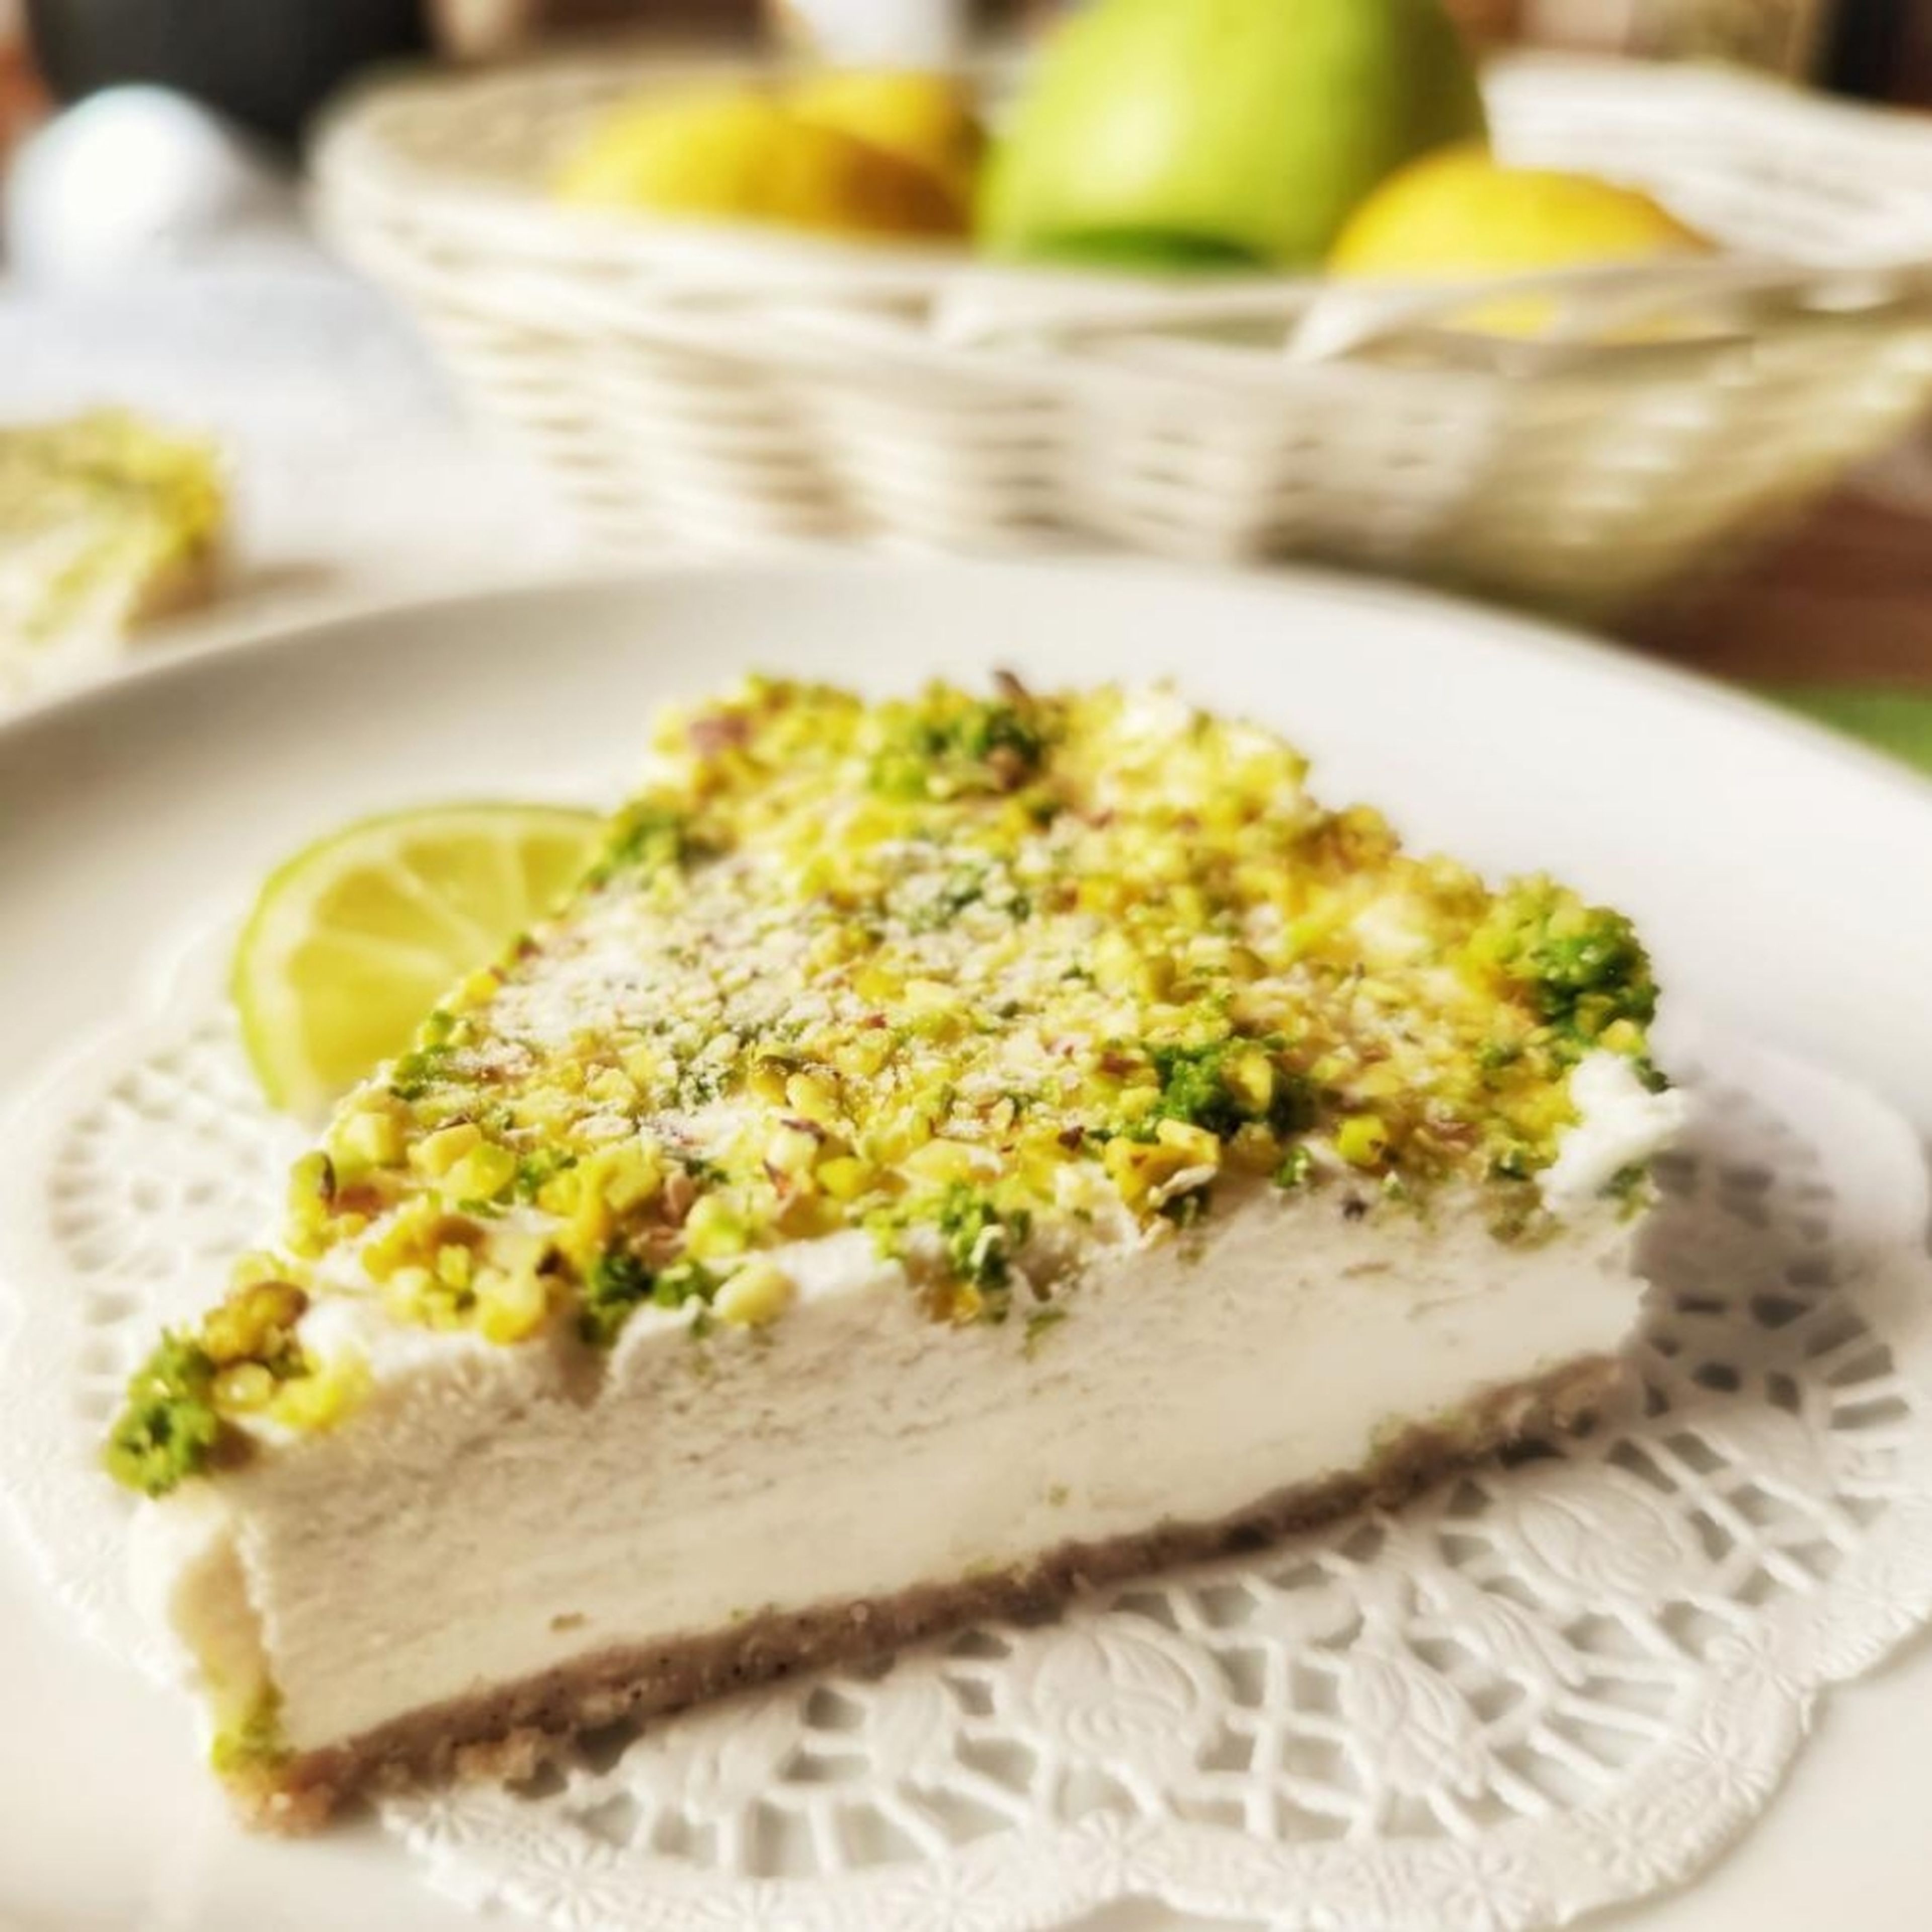 Take out the mold with a crust from the freezer, spread the cream over it, and sprinkle on the top of it with the ground pistachio and lime zest. Put it back in the freezer for another 45 min, and serve it cold. Delicious for hot summer days!